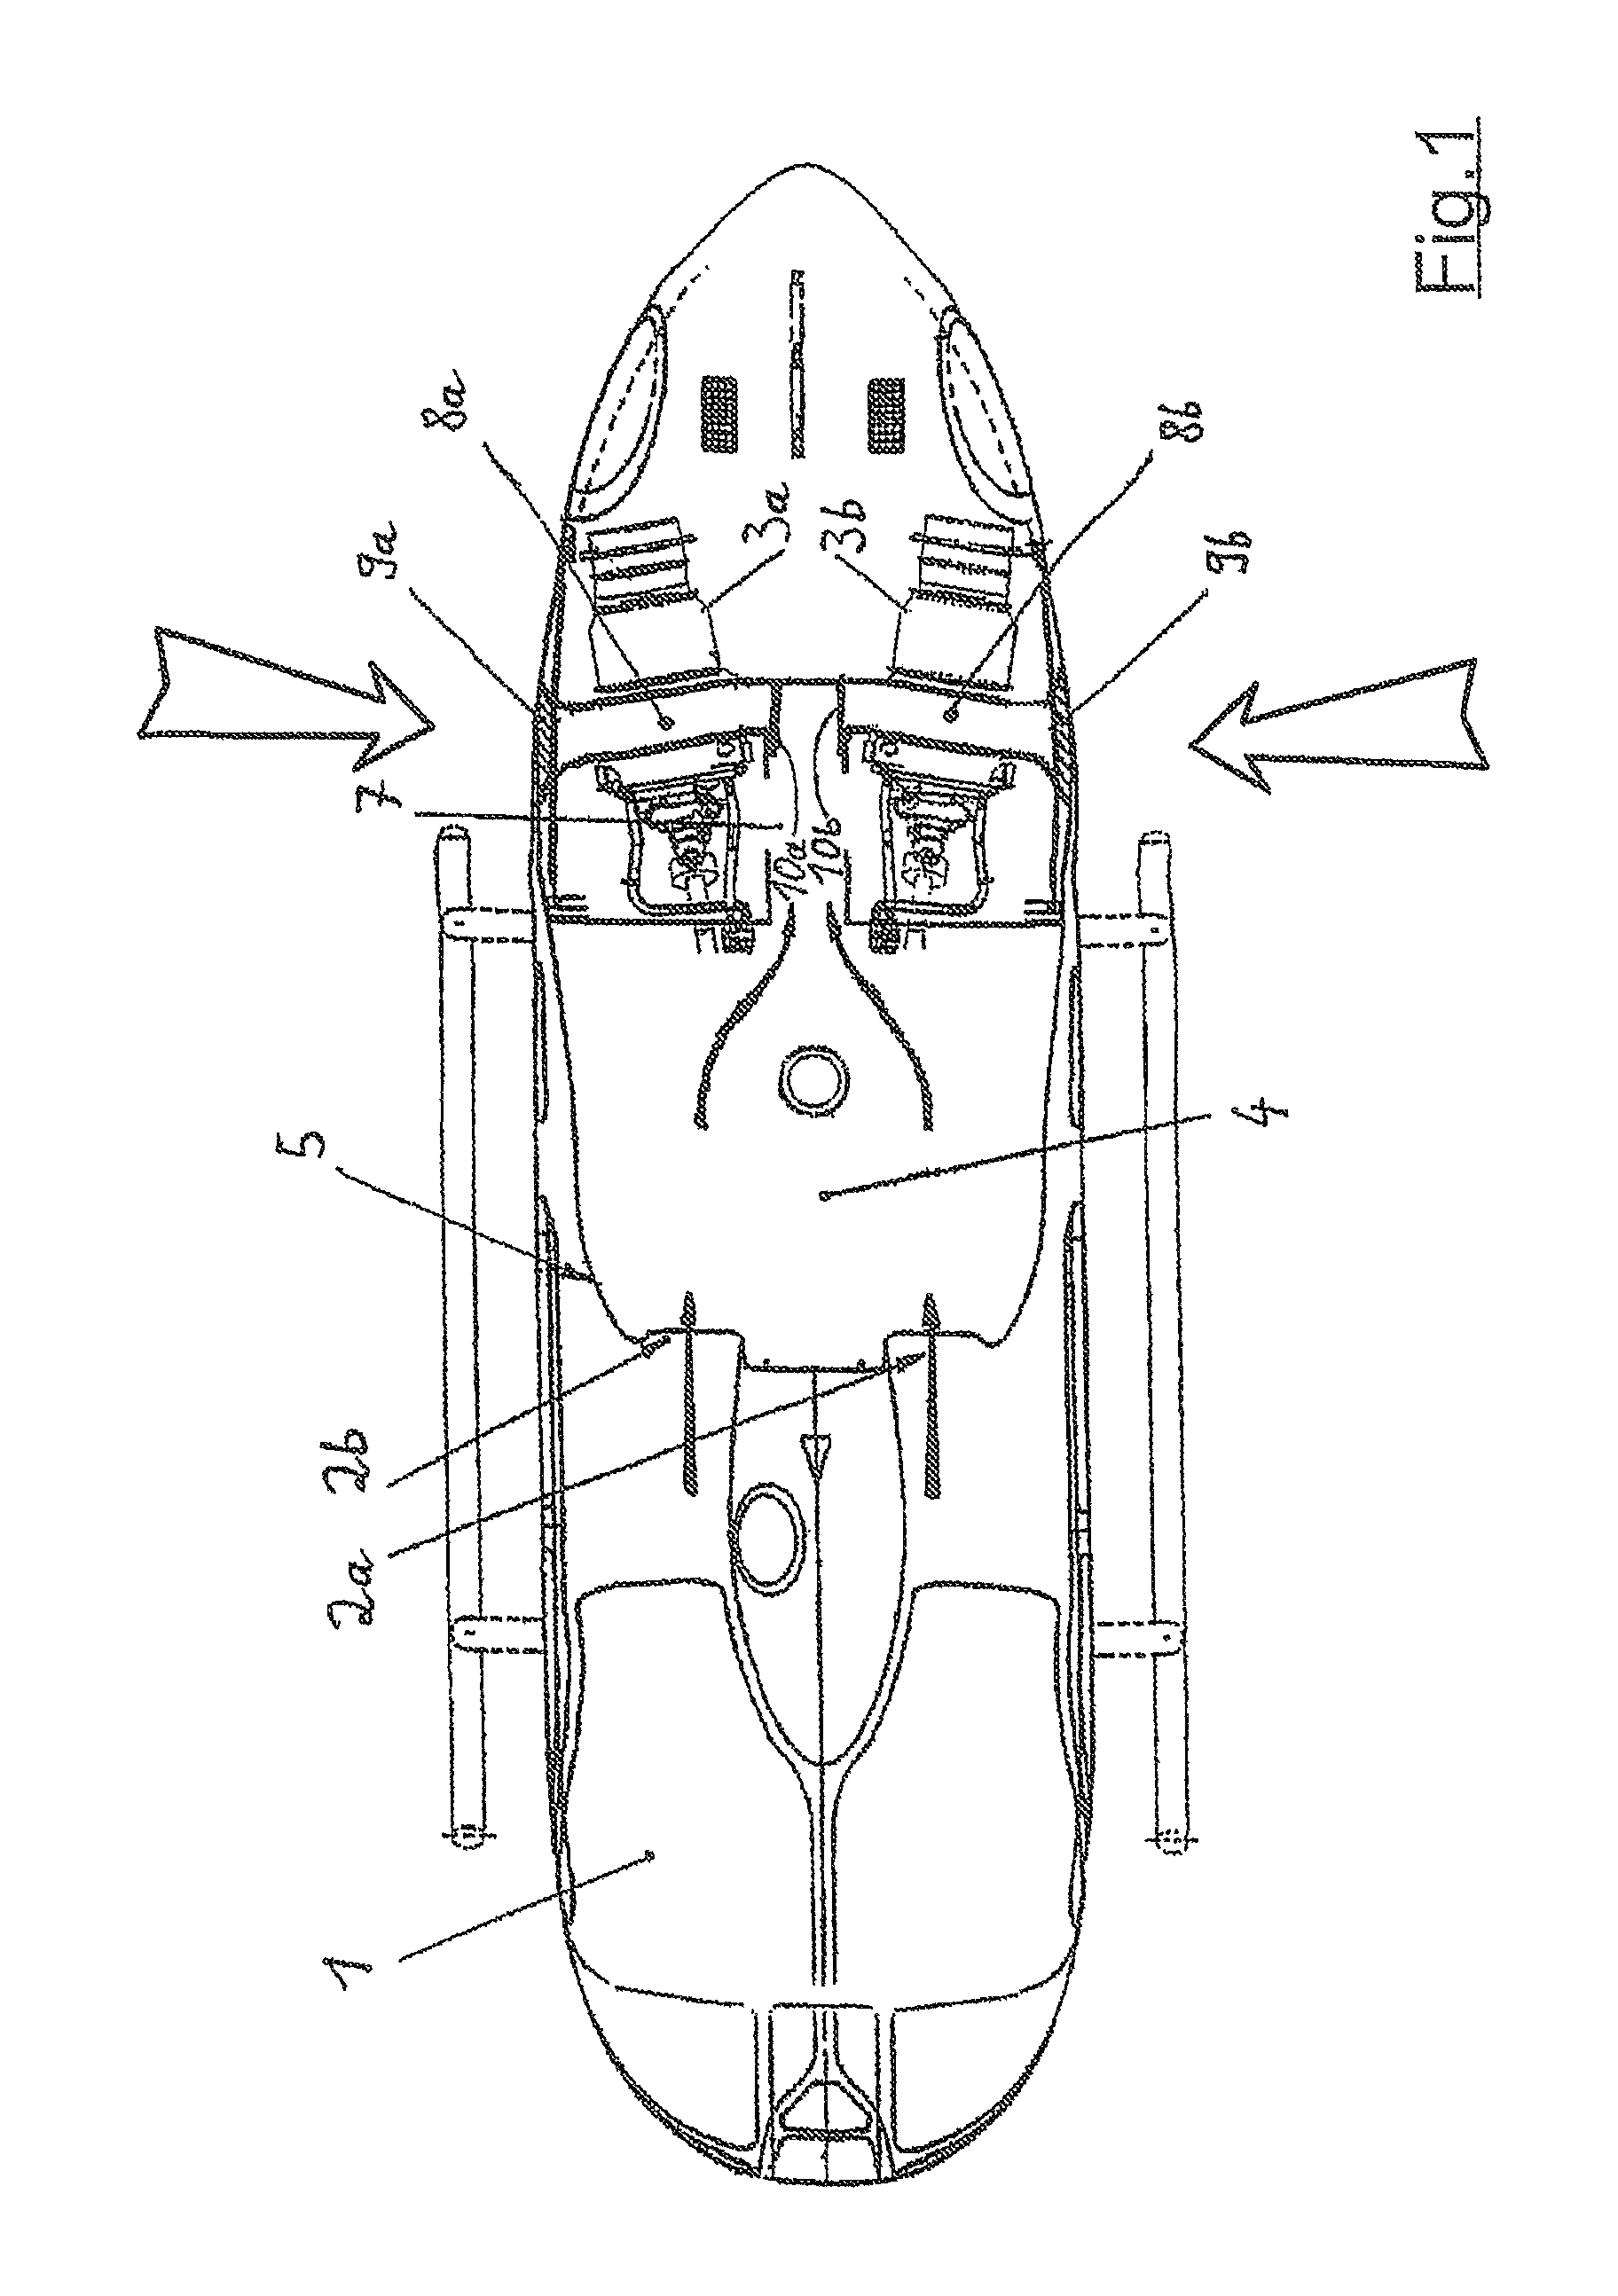 Device for feeding combustion air to an engine of an aircraft